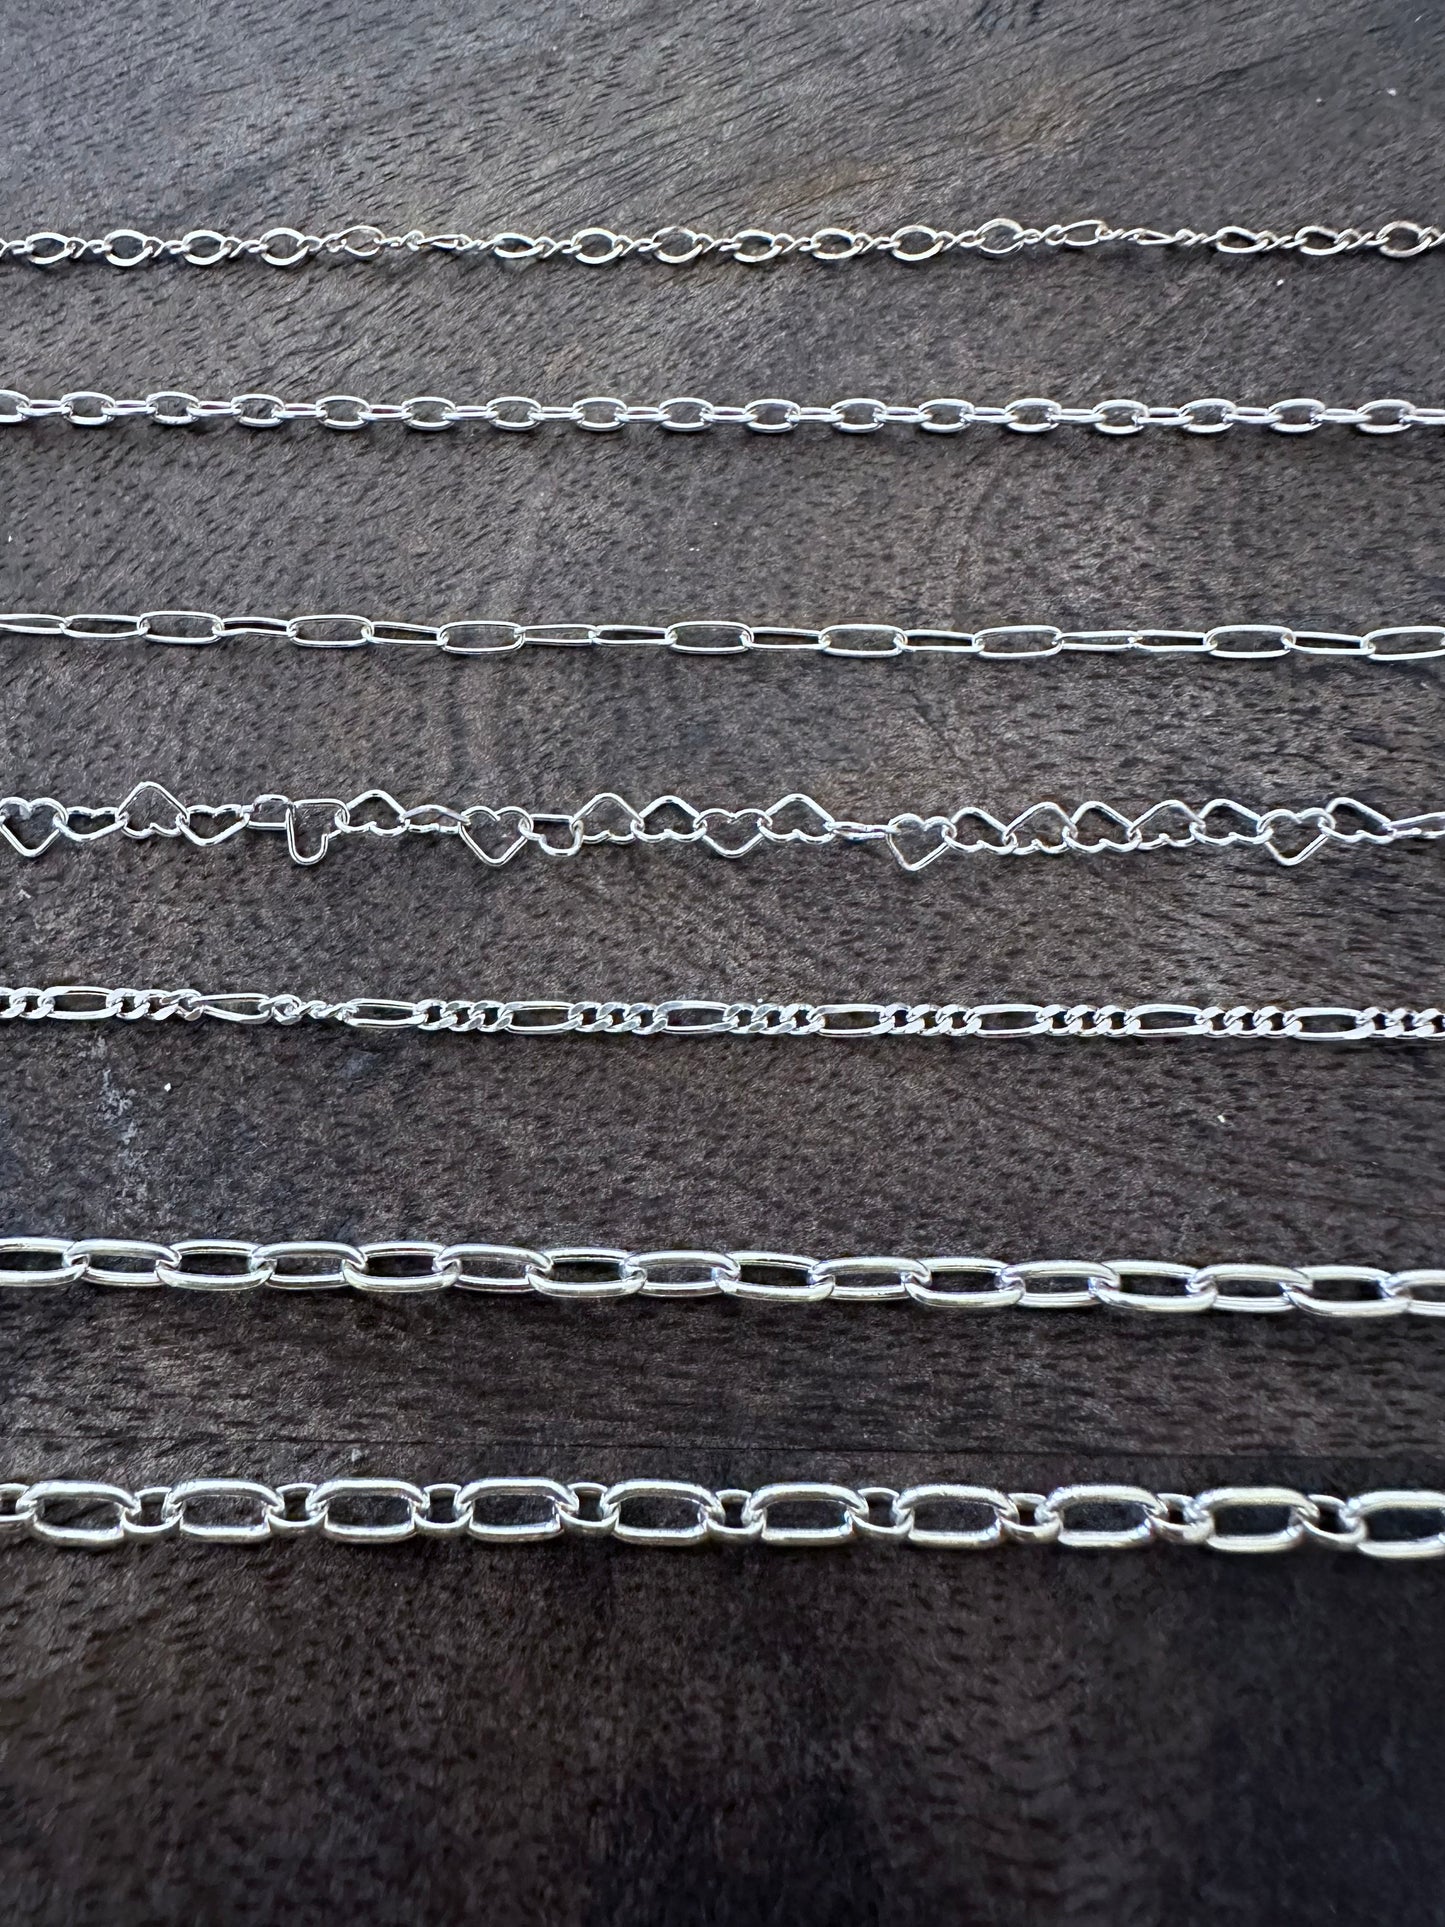 7 sterling silver chains on a wooden background descending in size. 